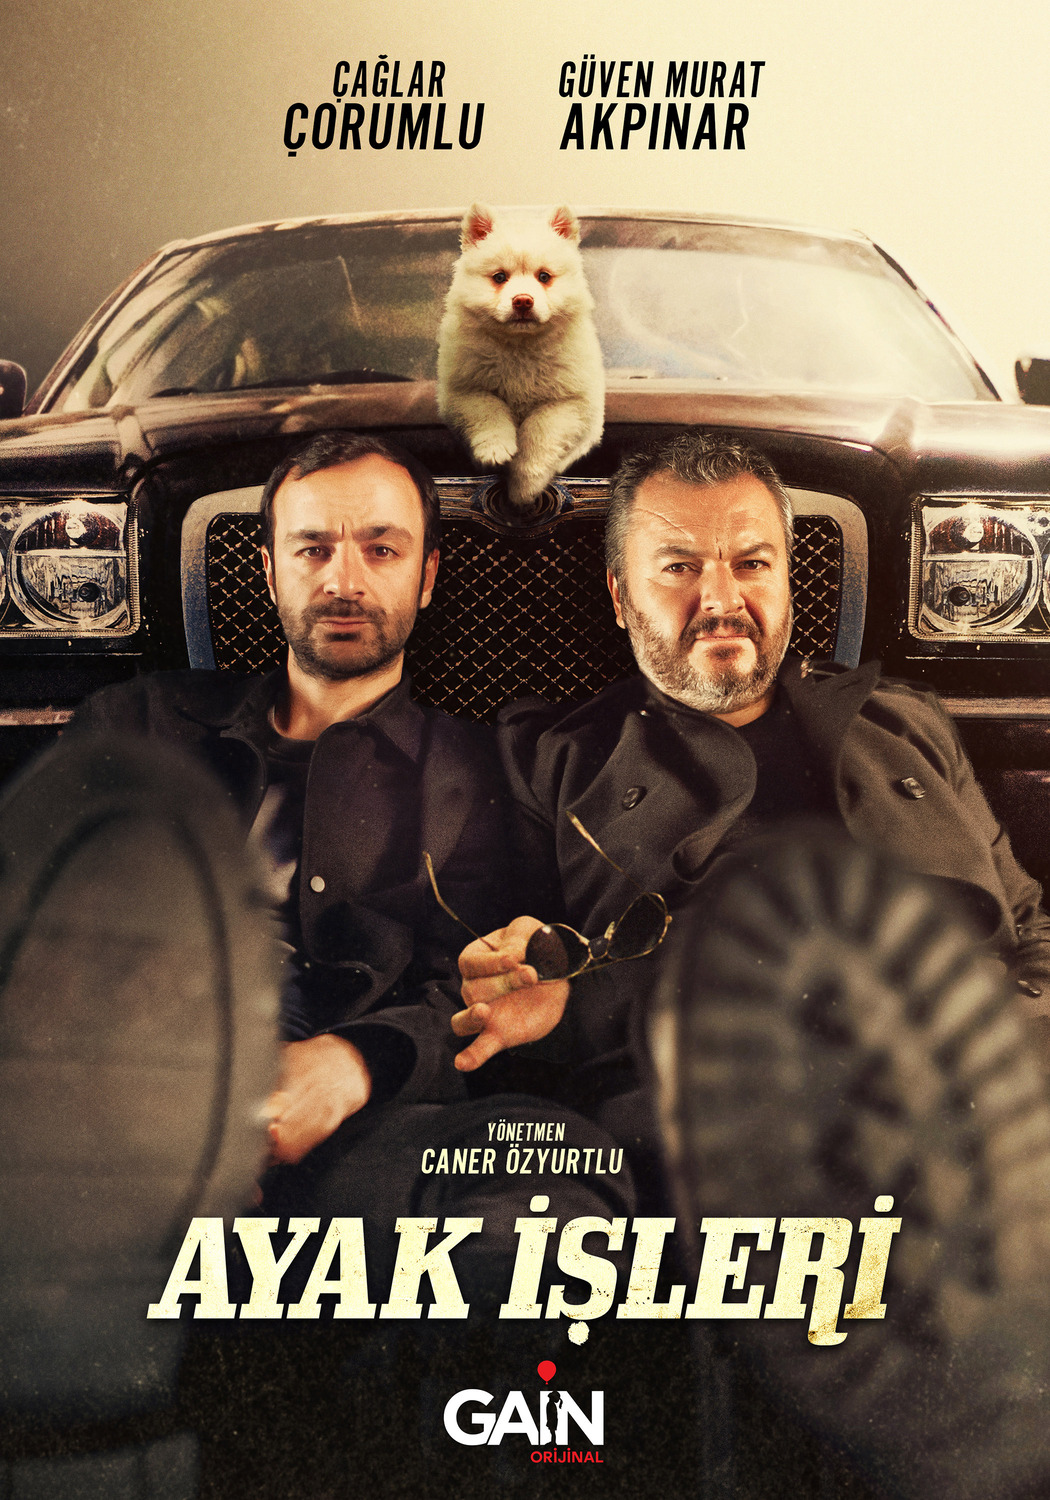 Extra Large TV Poster Image for Ayak Isleri (#2 of 8)